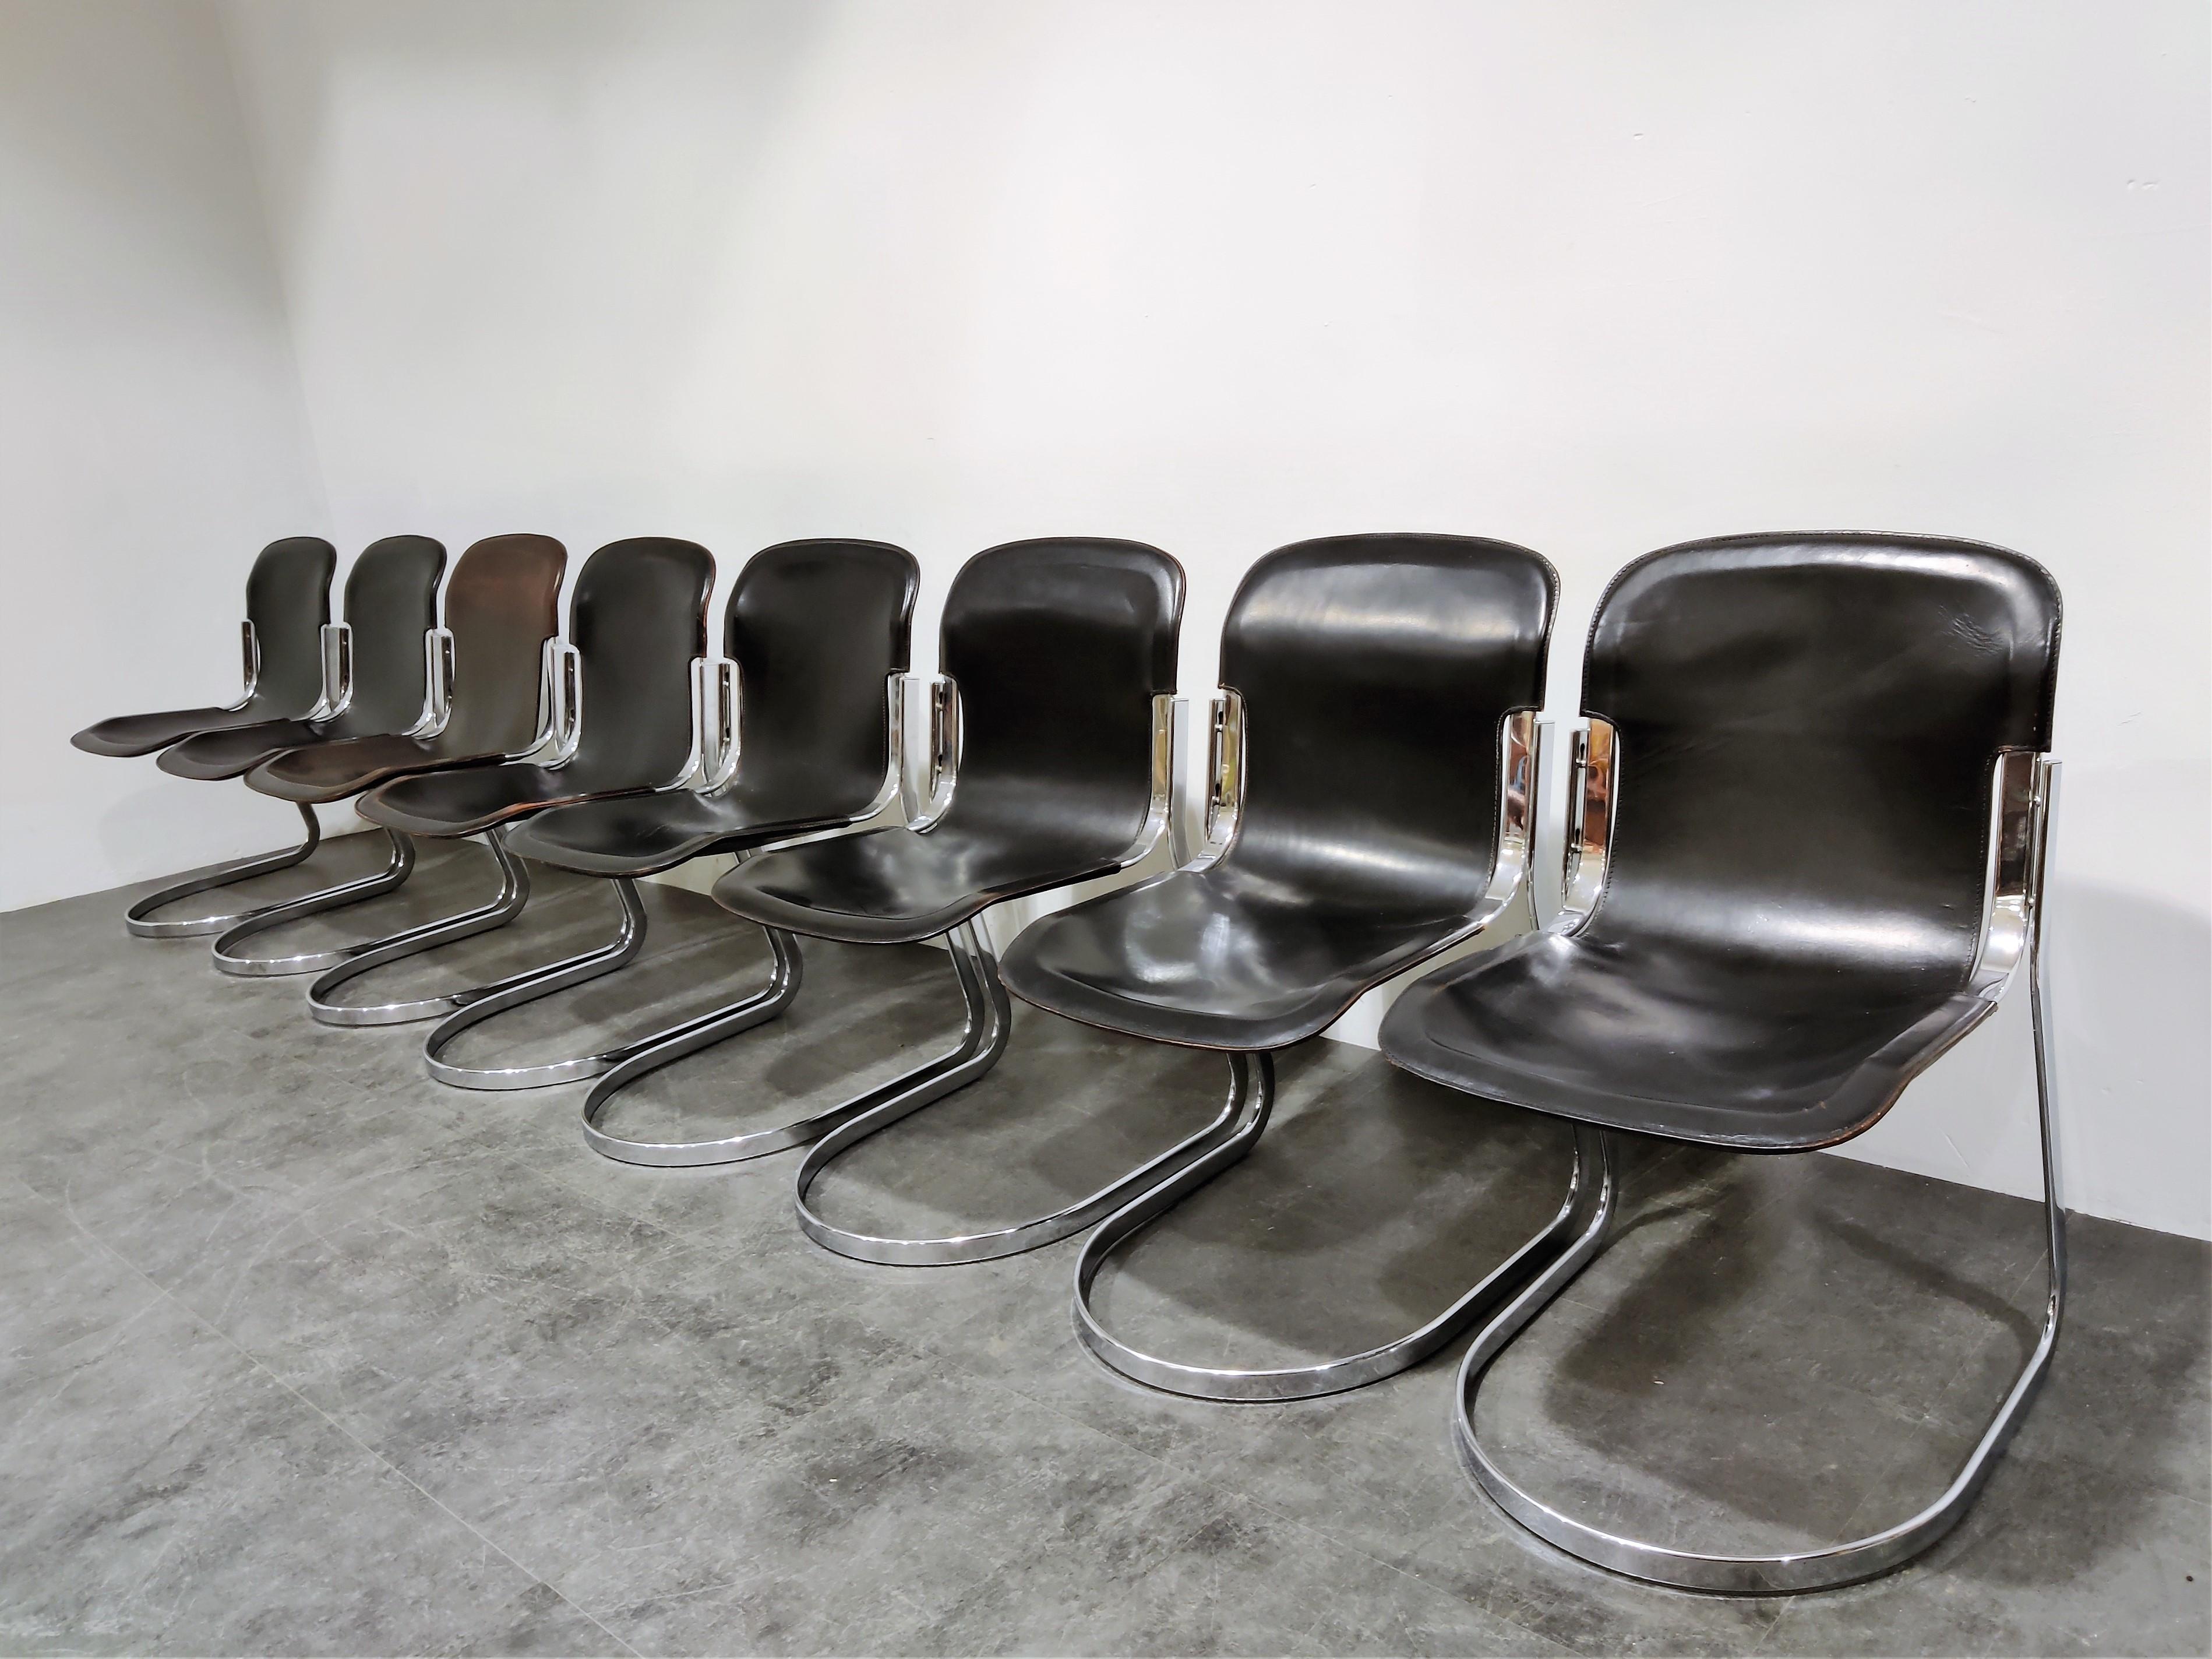 Set of 8 dining chairs designed by Willy Rizzo for Cidue (model C2).

The chairs have a beautfiully shaped chrome frame and come with the original black leather seats.

The chairs are stackable.

Very good condition, no discoloration, no